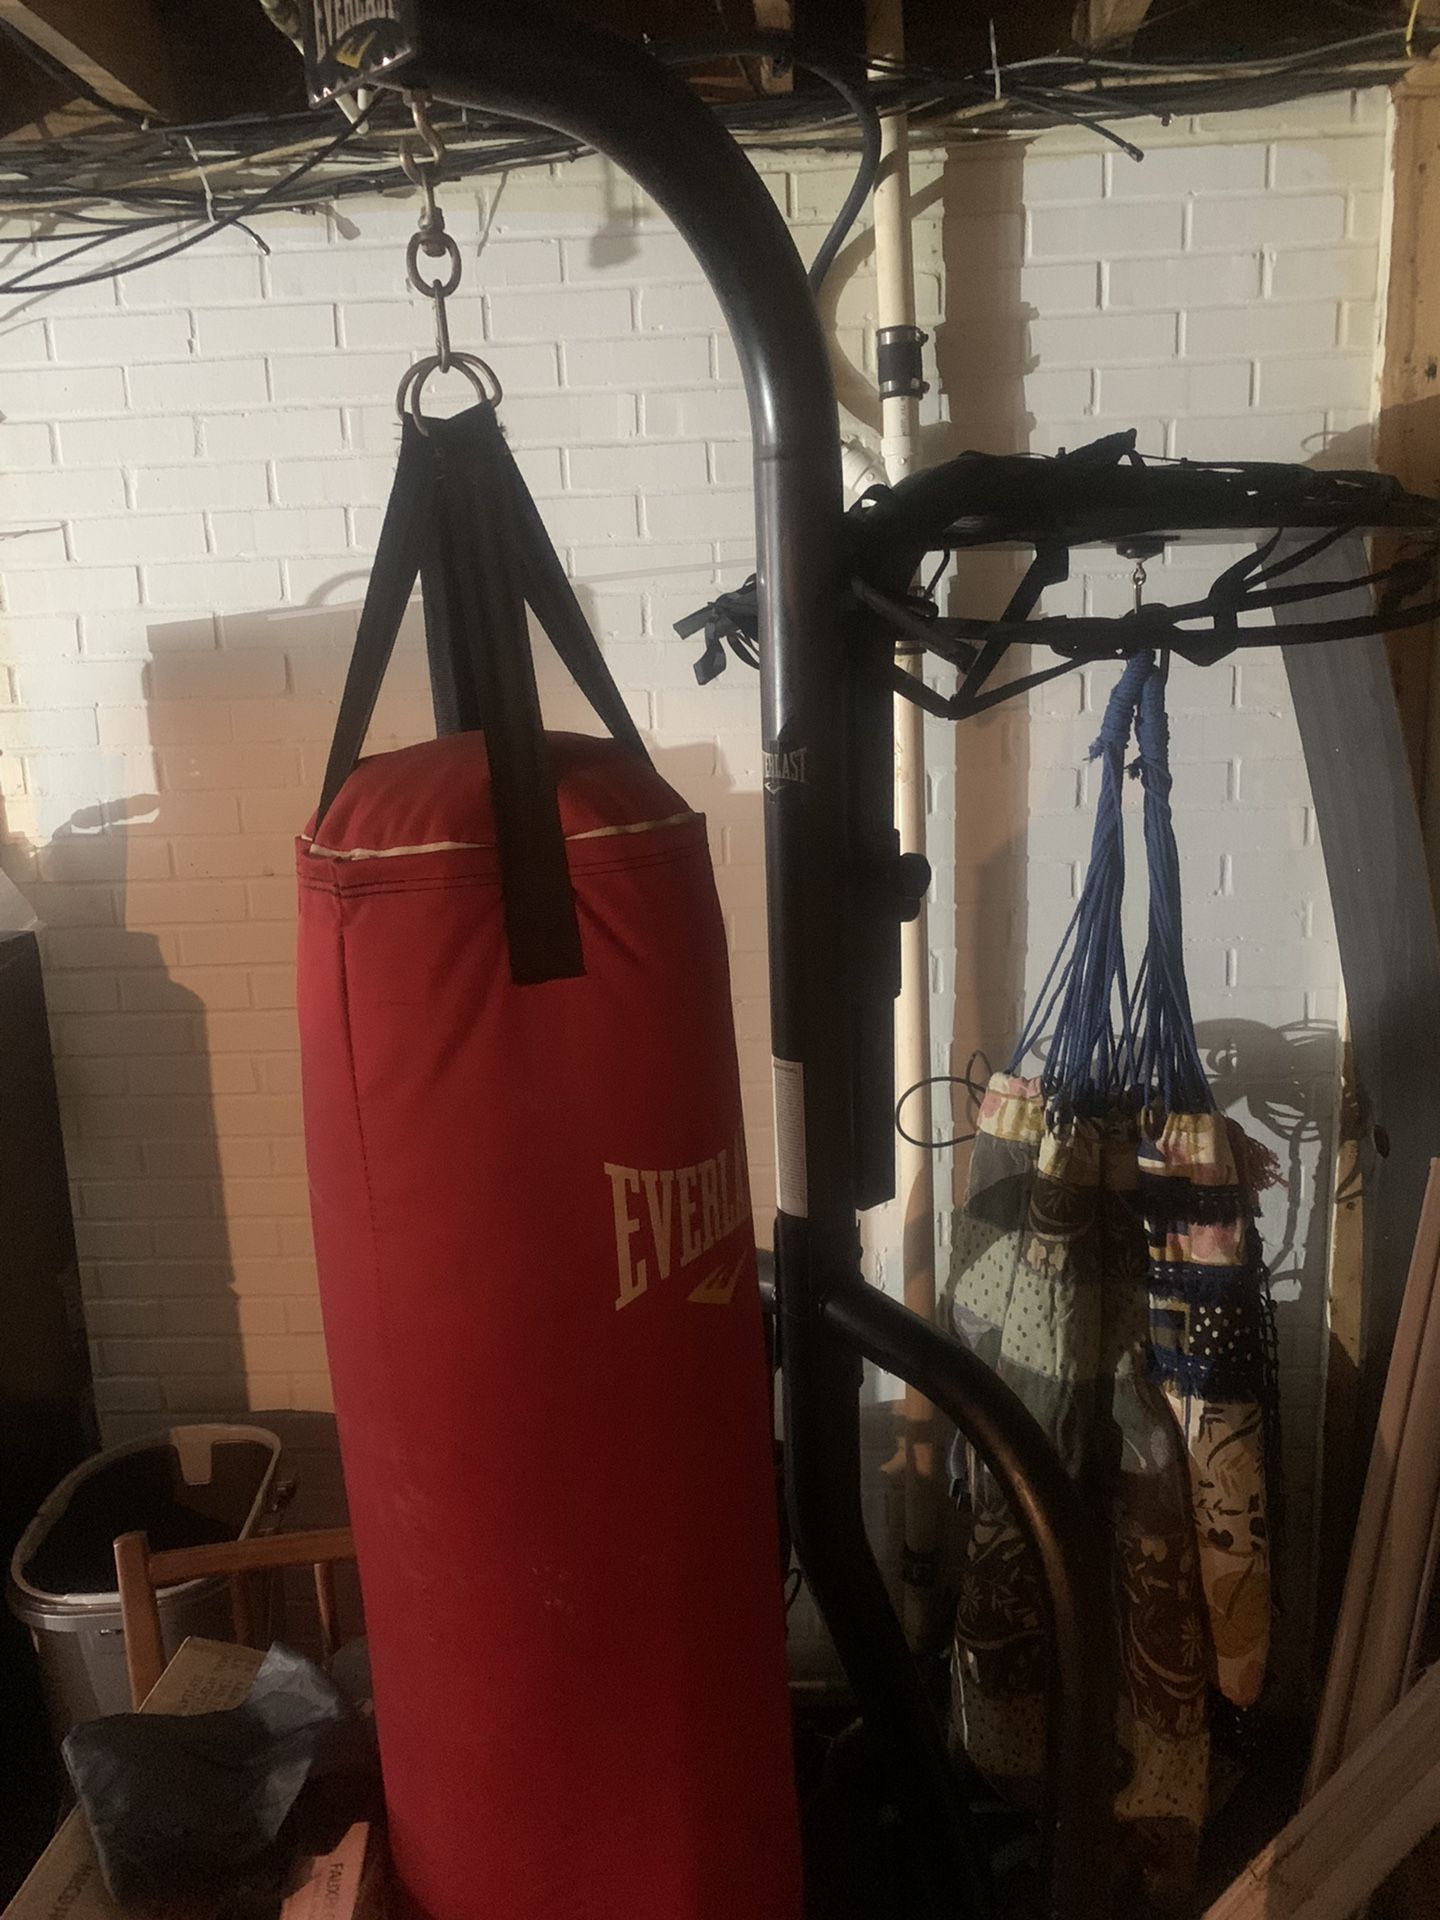 Everlast Punching Bag And Speed Bag Stand With Bah